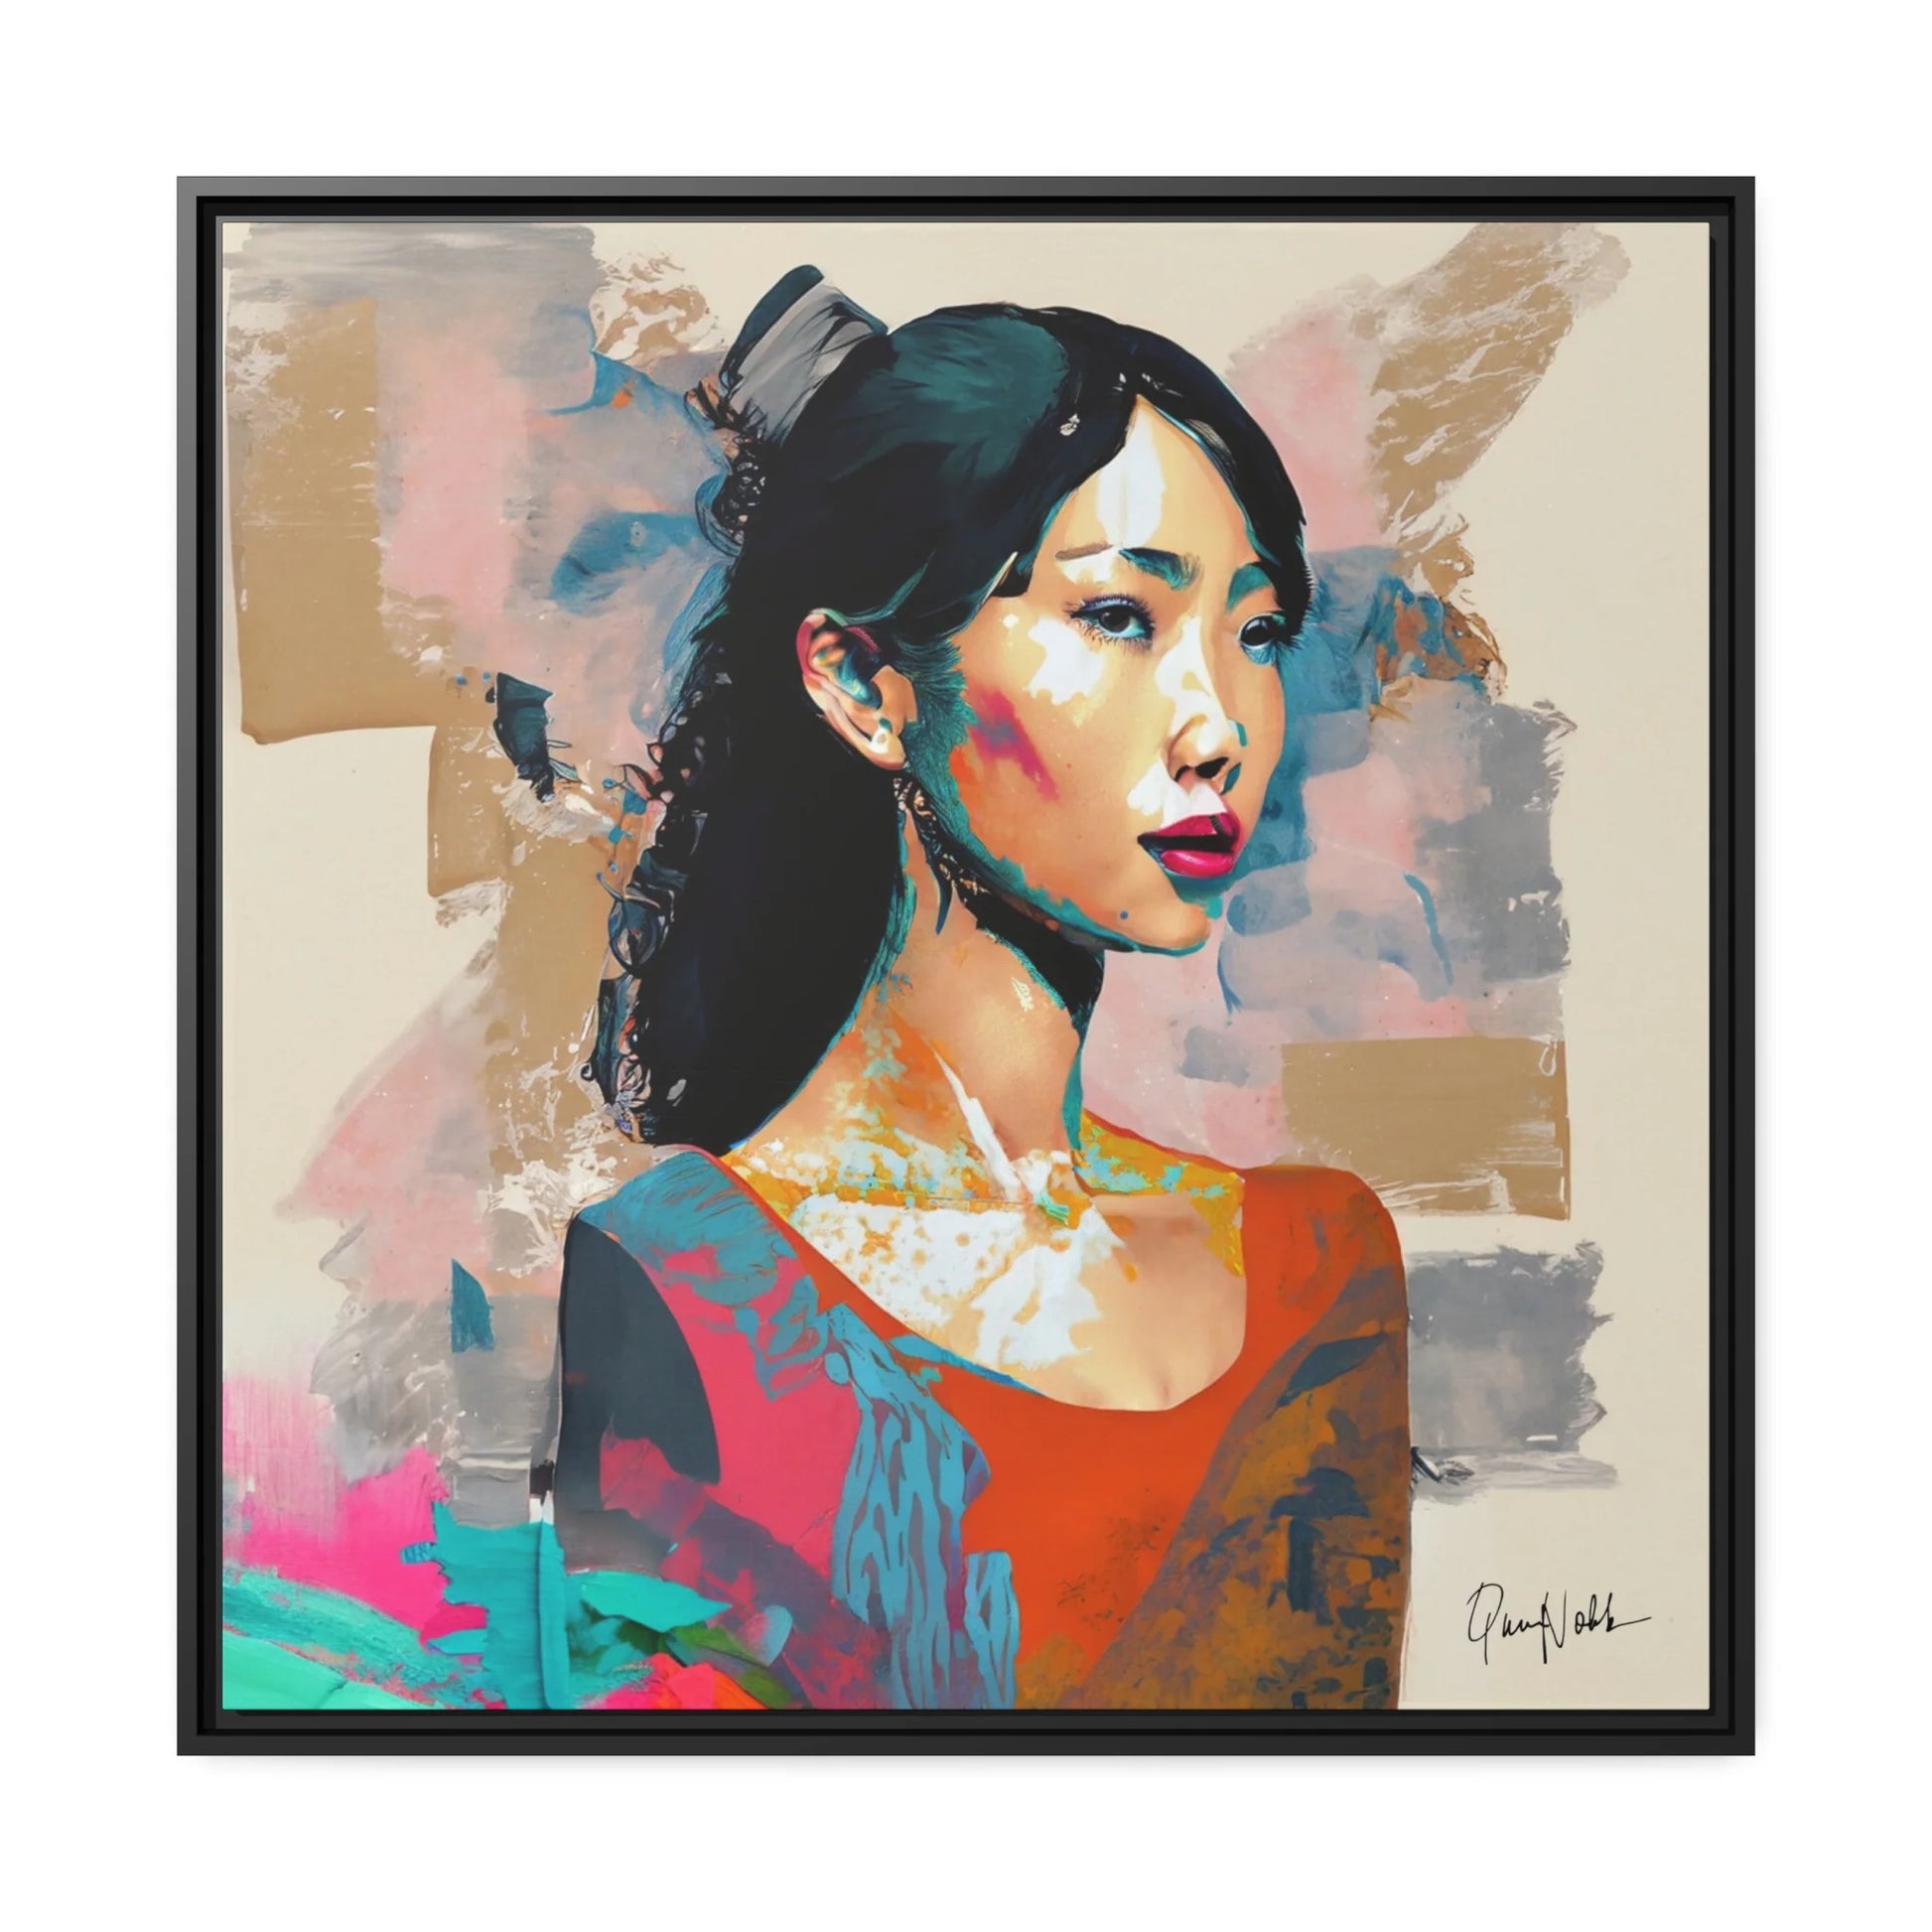 "Exquisite Framed Canvas Wall Art: Captivating Portrait of an Asian Lady"